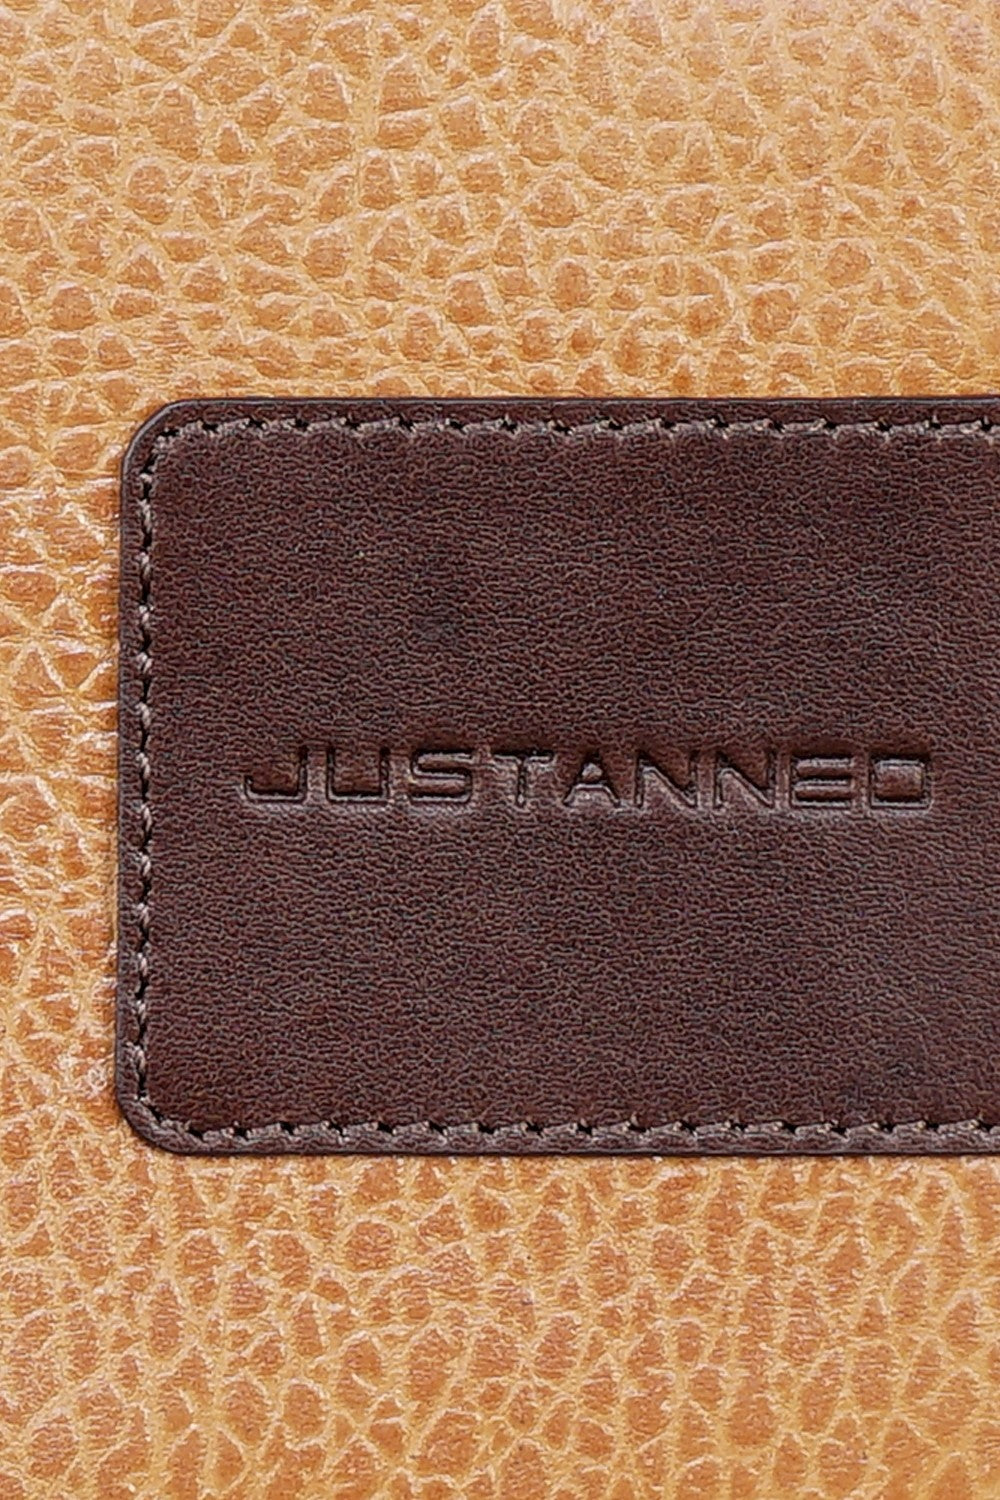 Justanned Patch Detaining Men Wallet